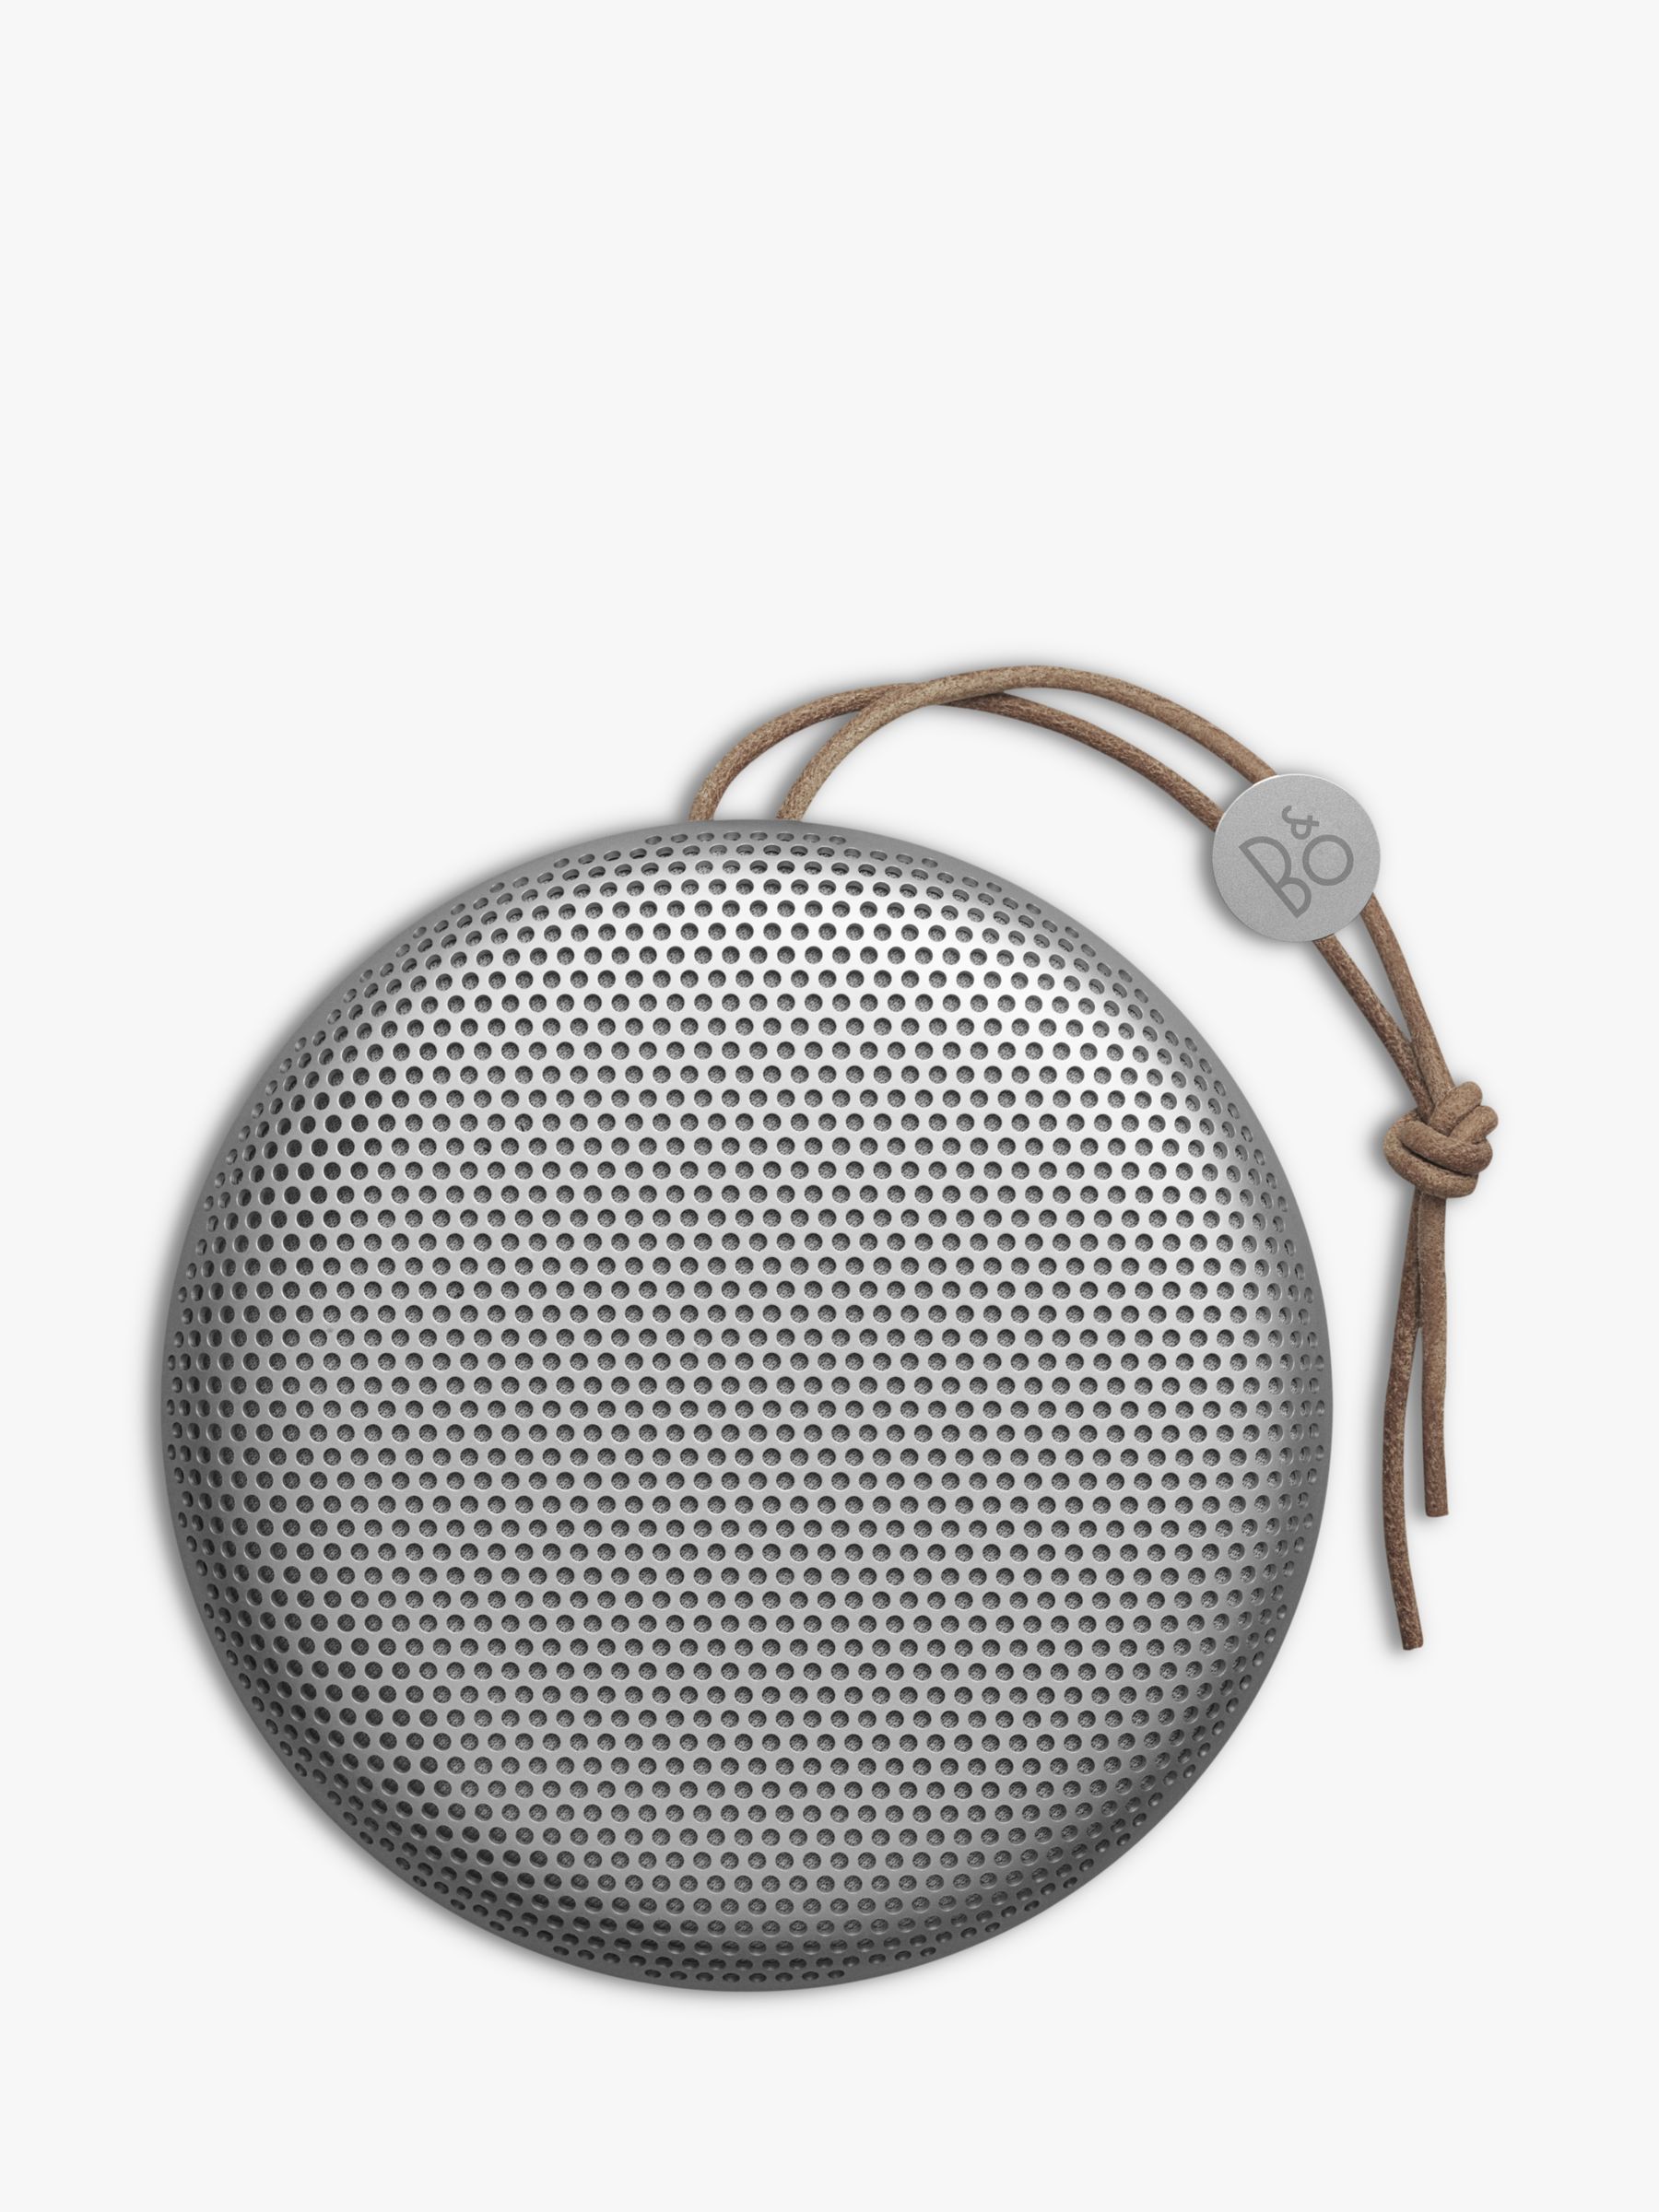 Bang & Olufsen Beoplay A1 Portable Bluetooth Speaker